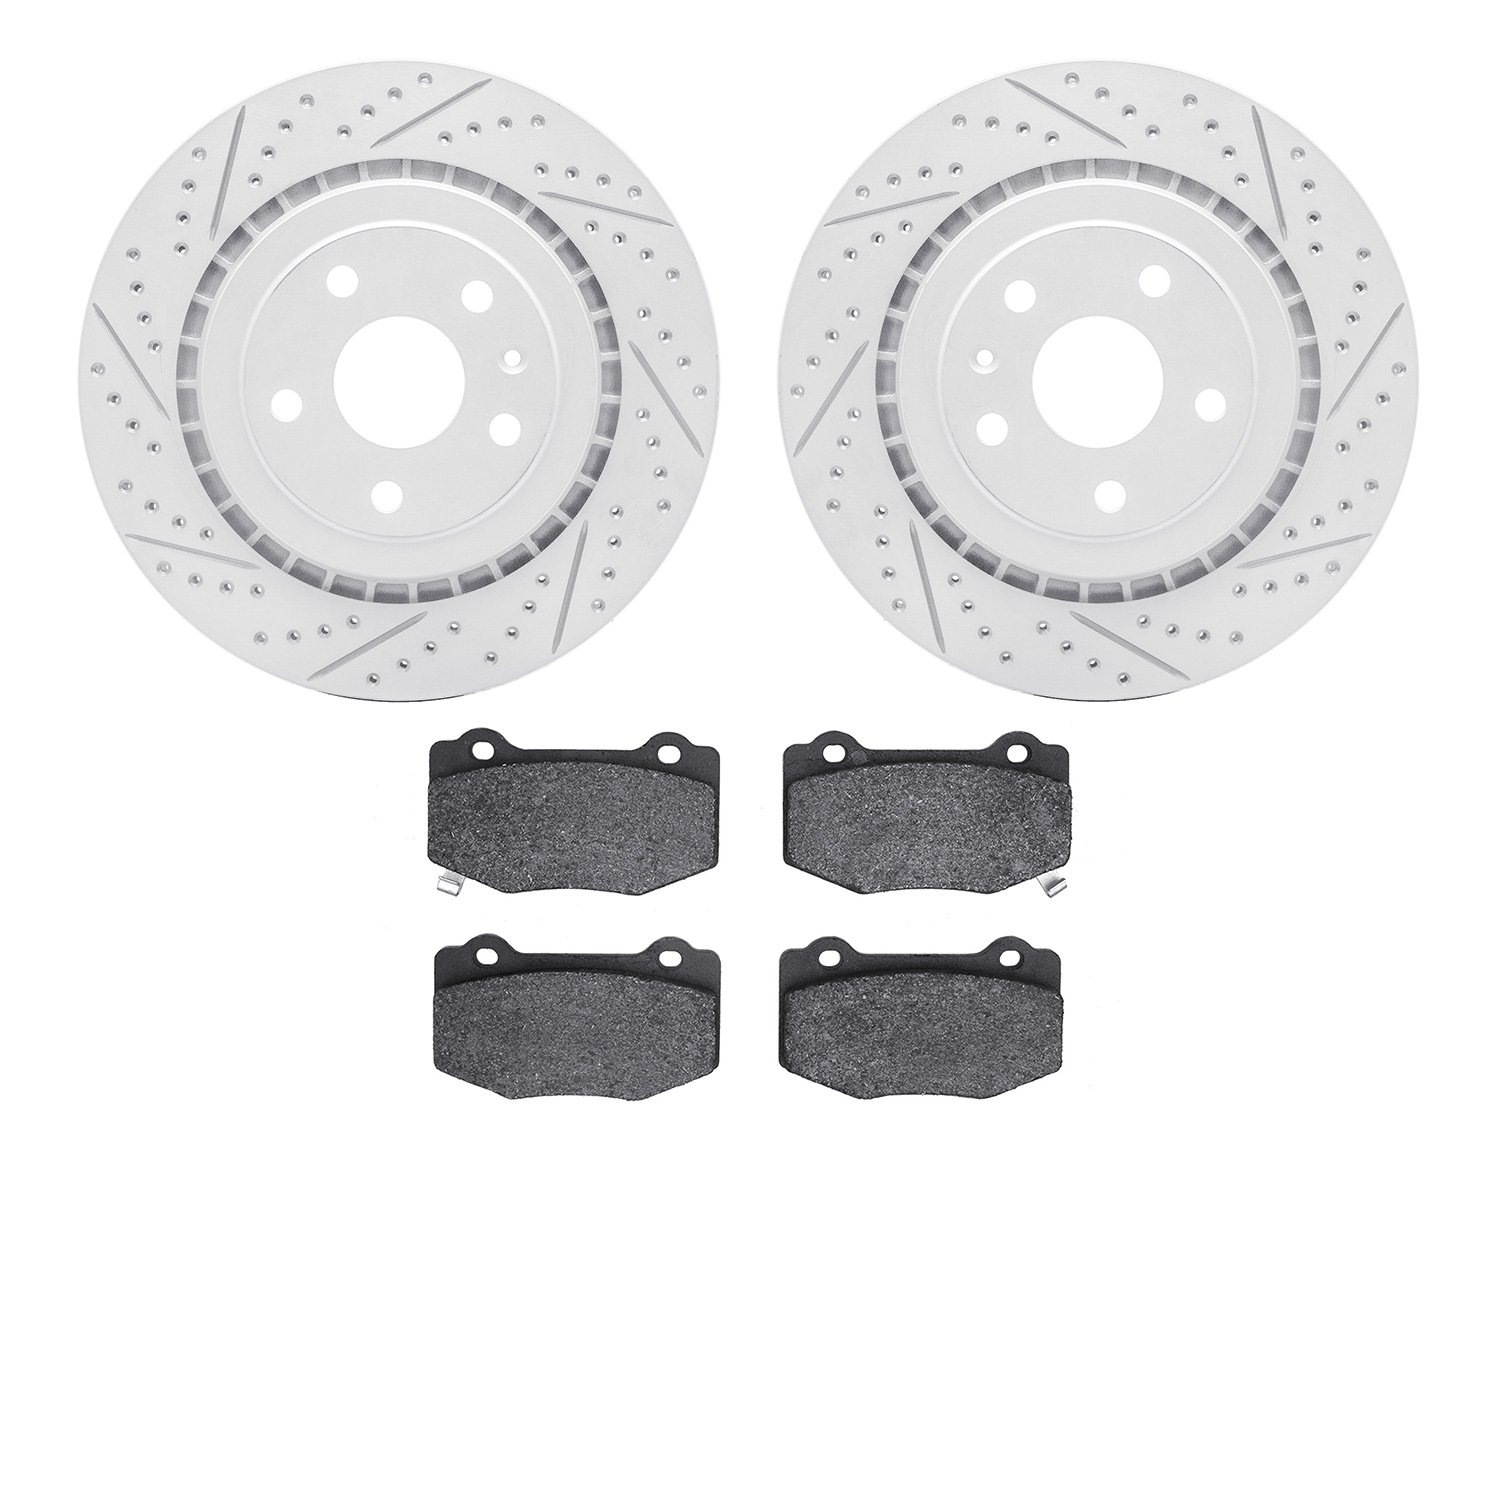 2502-47052 Geoperformance Drilled/Slotted Rotors w/5000 Advanced Brake Pads Kit, Fits Select GM, Position: Rear